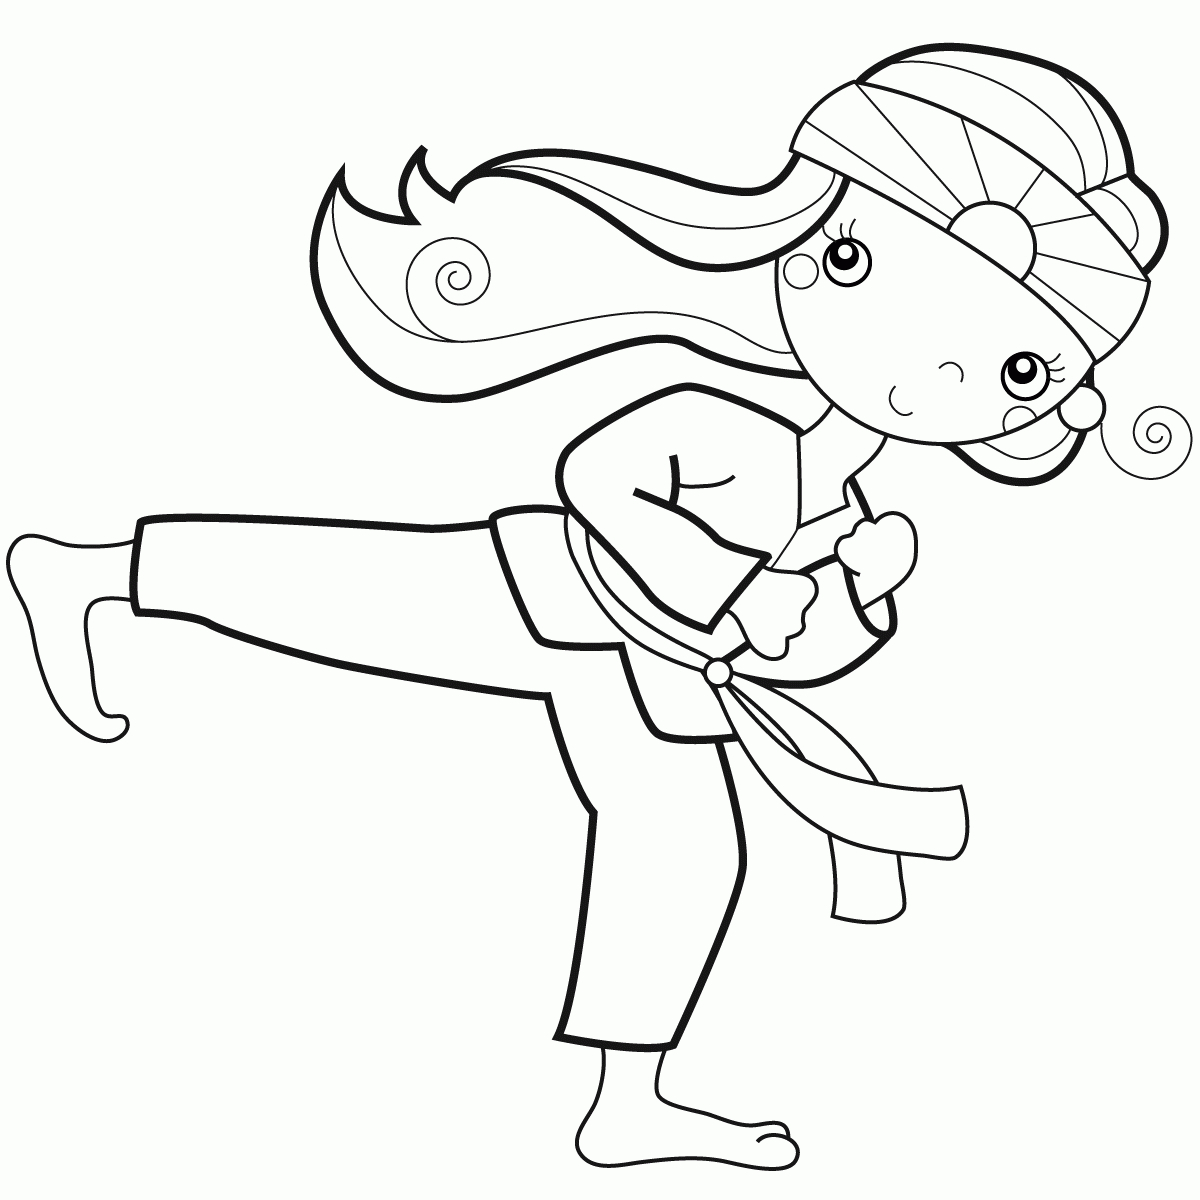 9 Pics Of Karate Kid Coloring Pages Printable - Karate Monkey - Free Printable Karate Coloring Pages